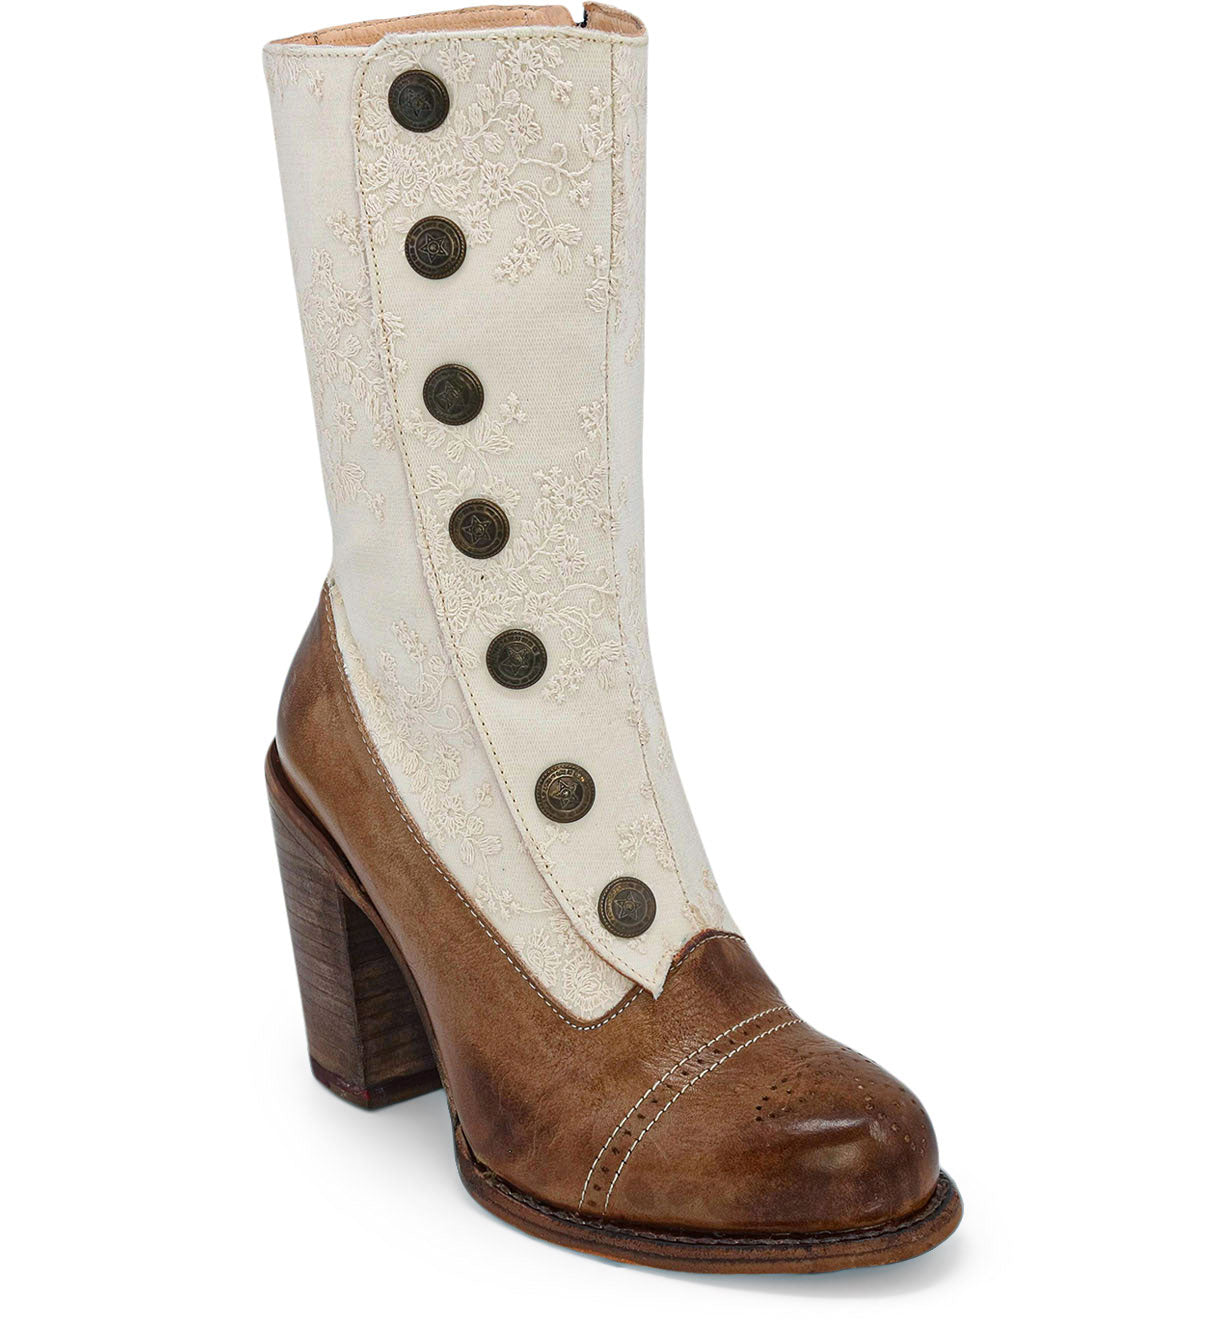 The Oak Tree Farms Amelia is a leather women's boot with buttons and a wooden heel.